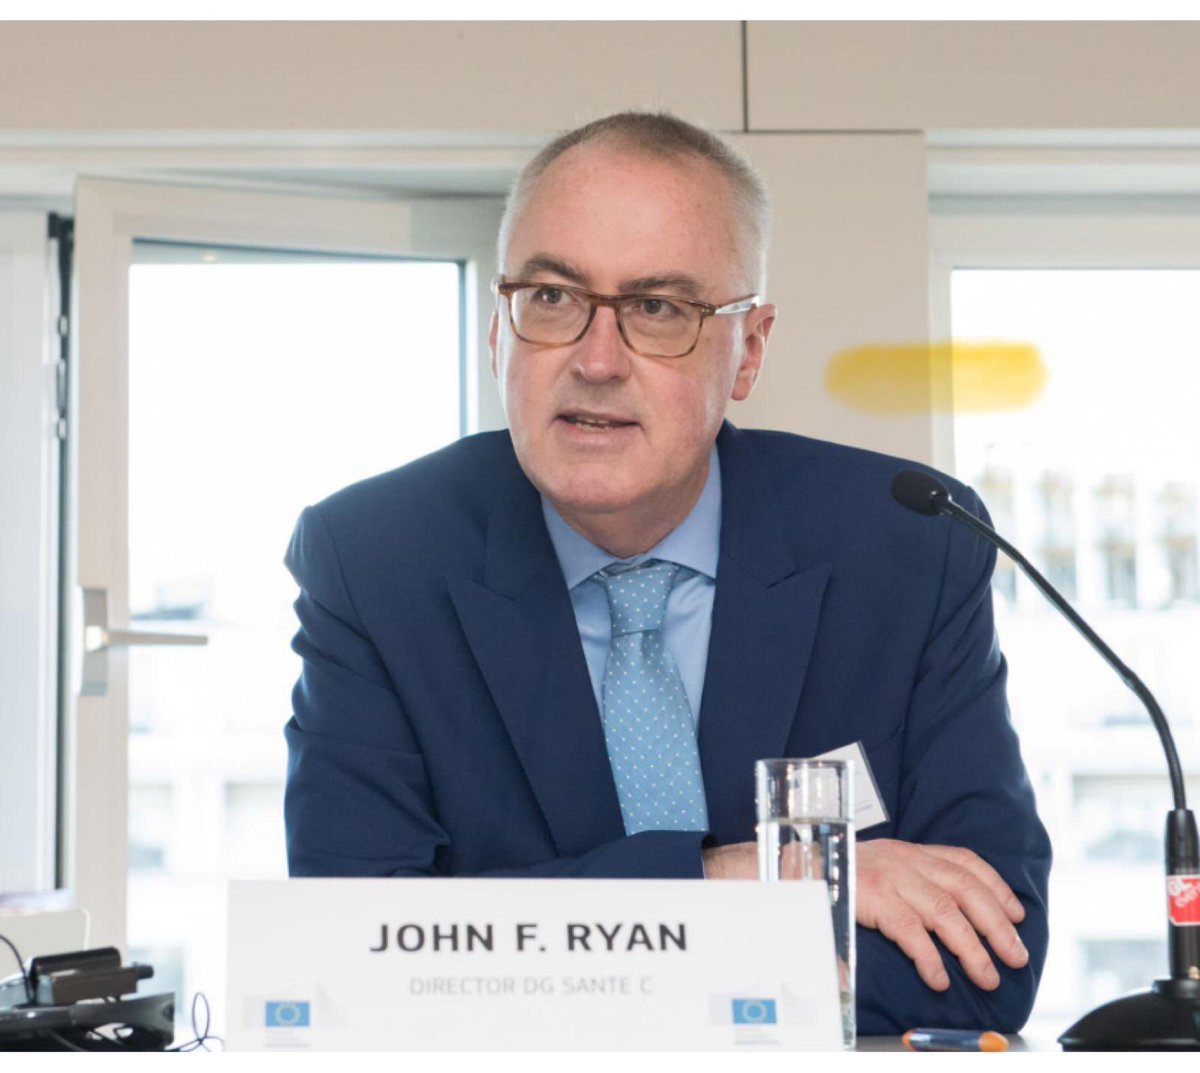 Saddened to learn about the passing of John Ryan, former Deputy Director-General of DG SANTE. He worked closely with @WHO over the years & his contribution has been instrumental for the creation of the #HealthUnion. We express our deepest condolences to his family & loved ones.